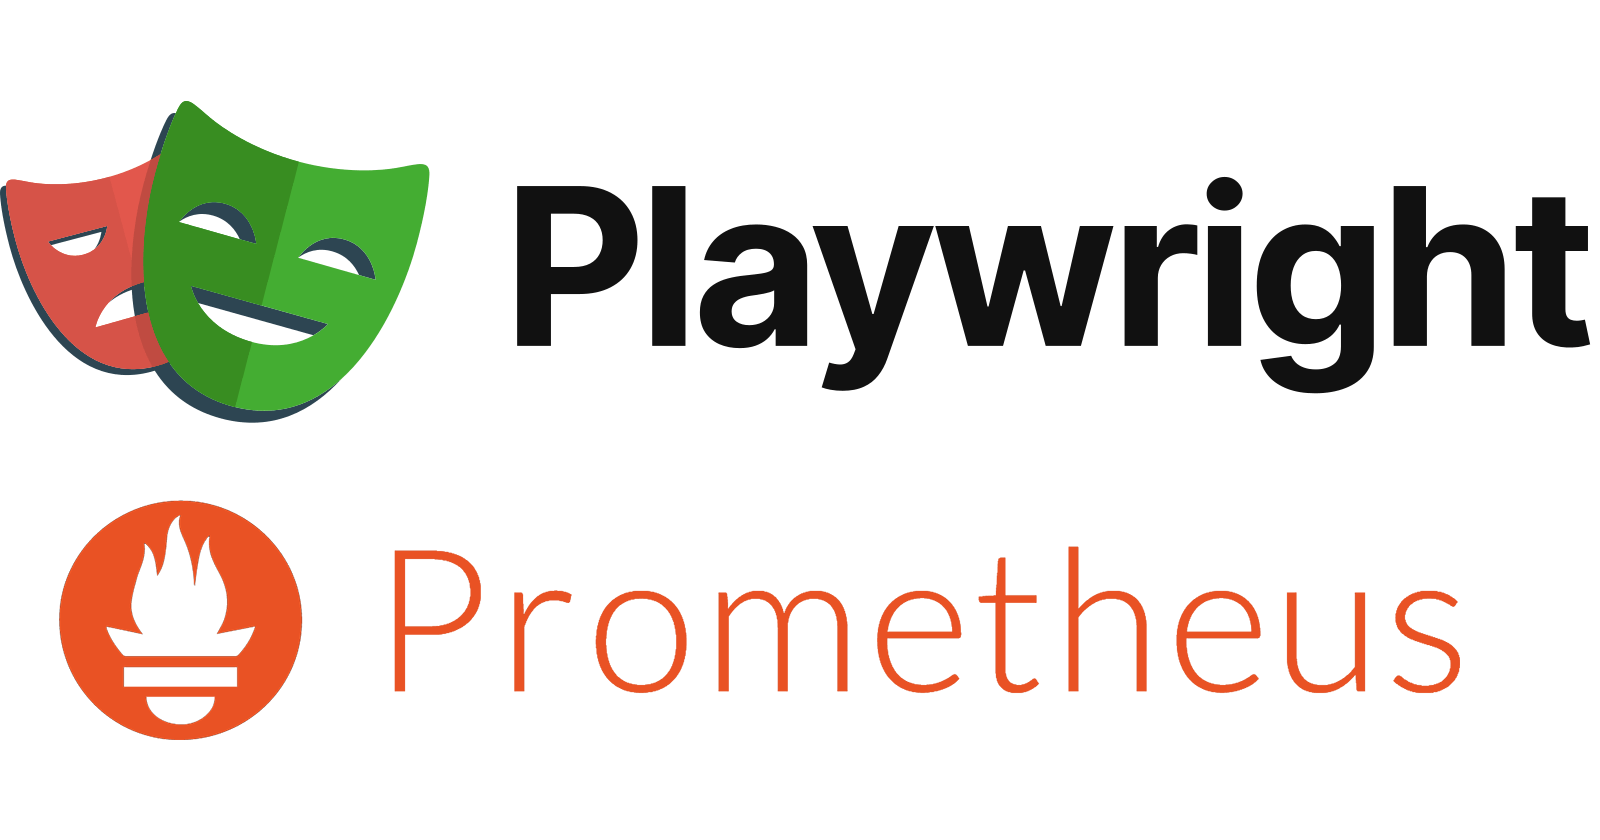 Playwright & Prometheus. Send your metrics in real-time